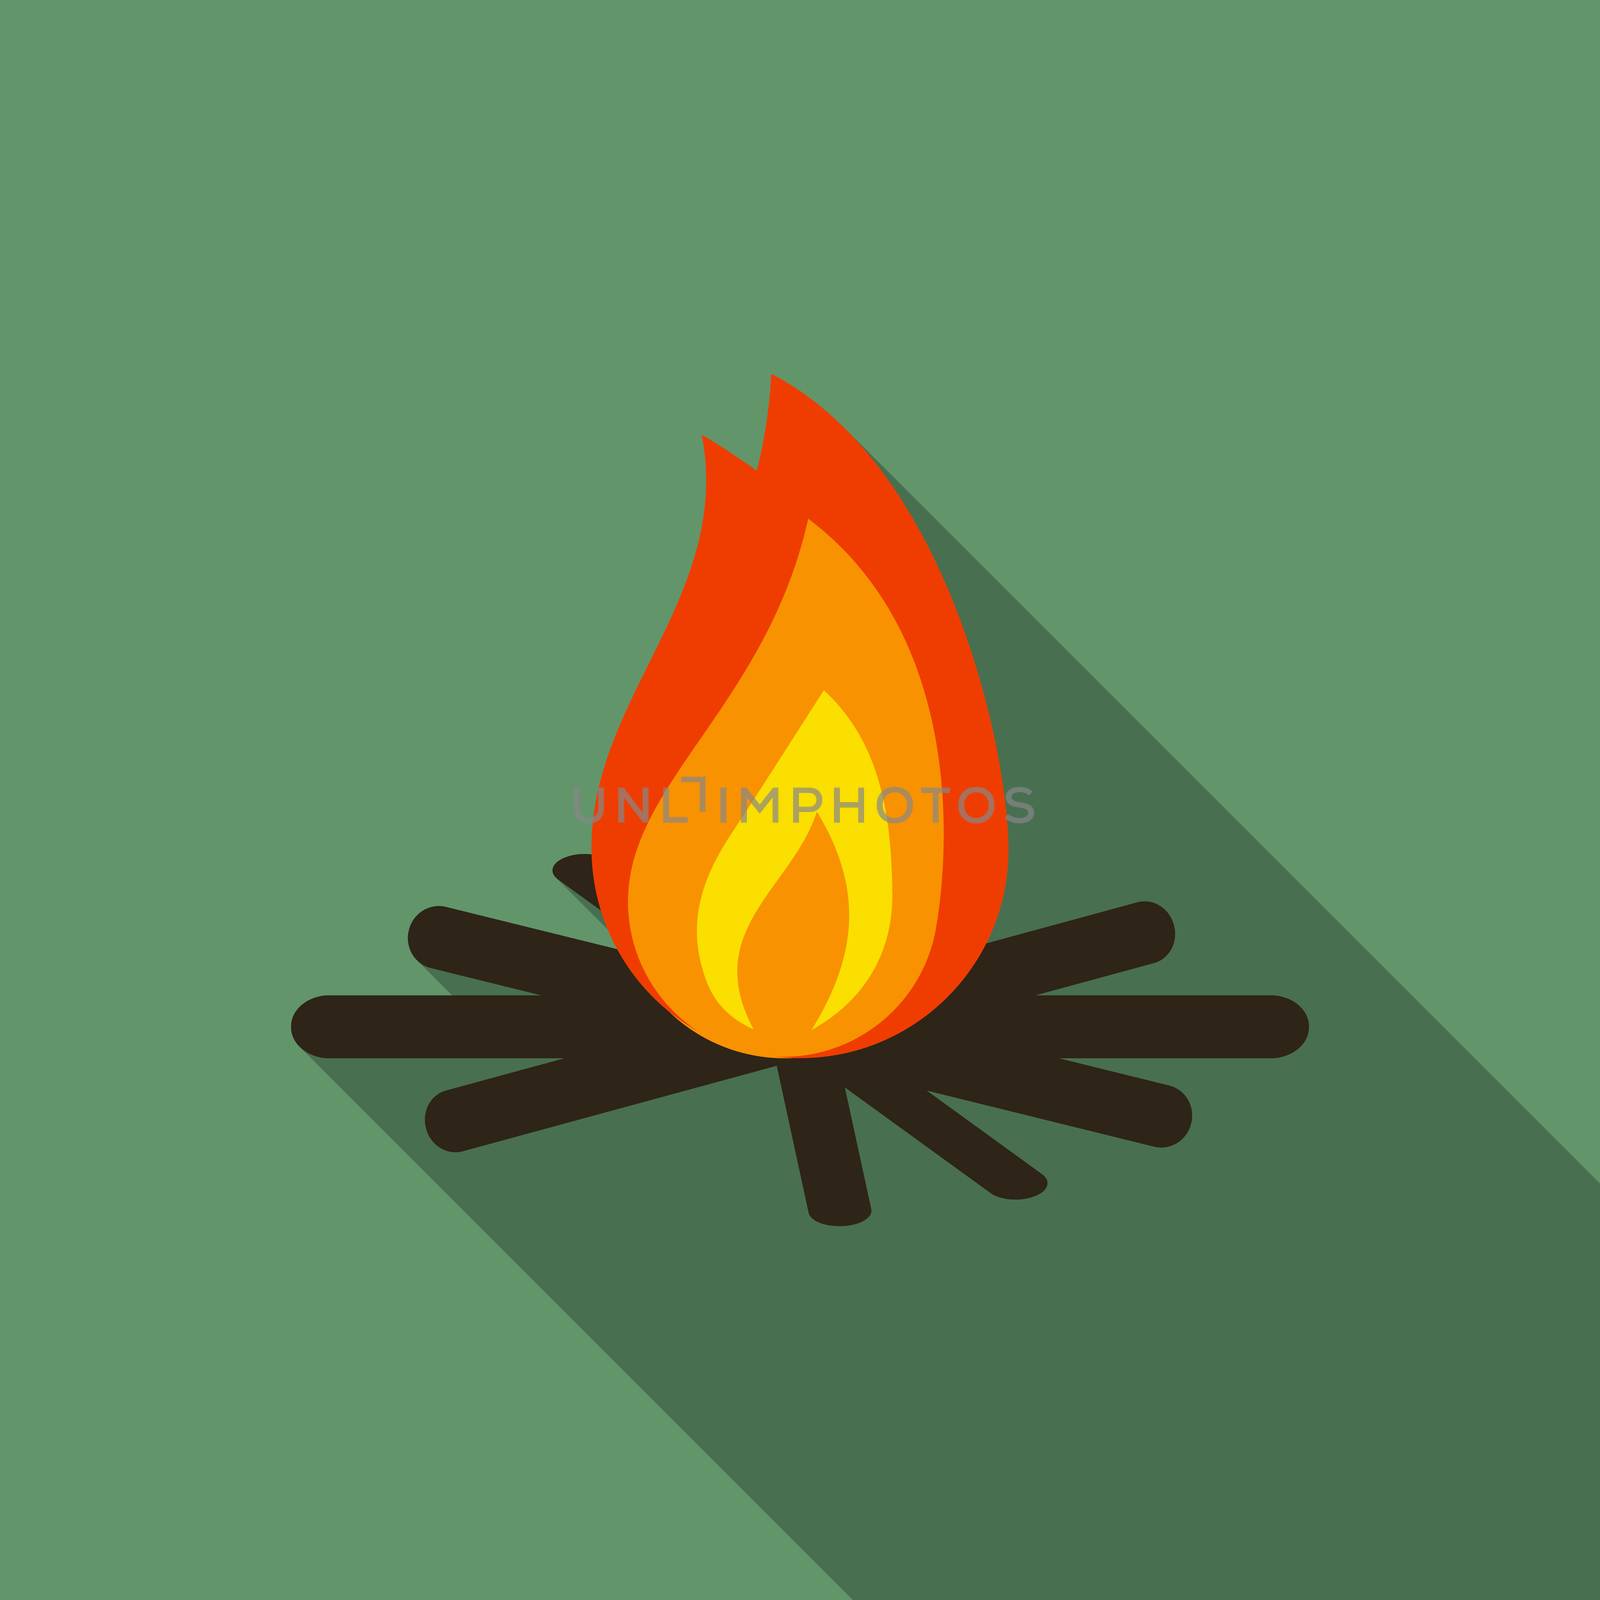 Flat design modern vector illustration of bonfire icon, camping and hiking symbol with long shadow by Lemon_workshop